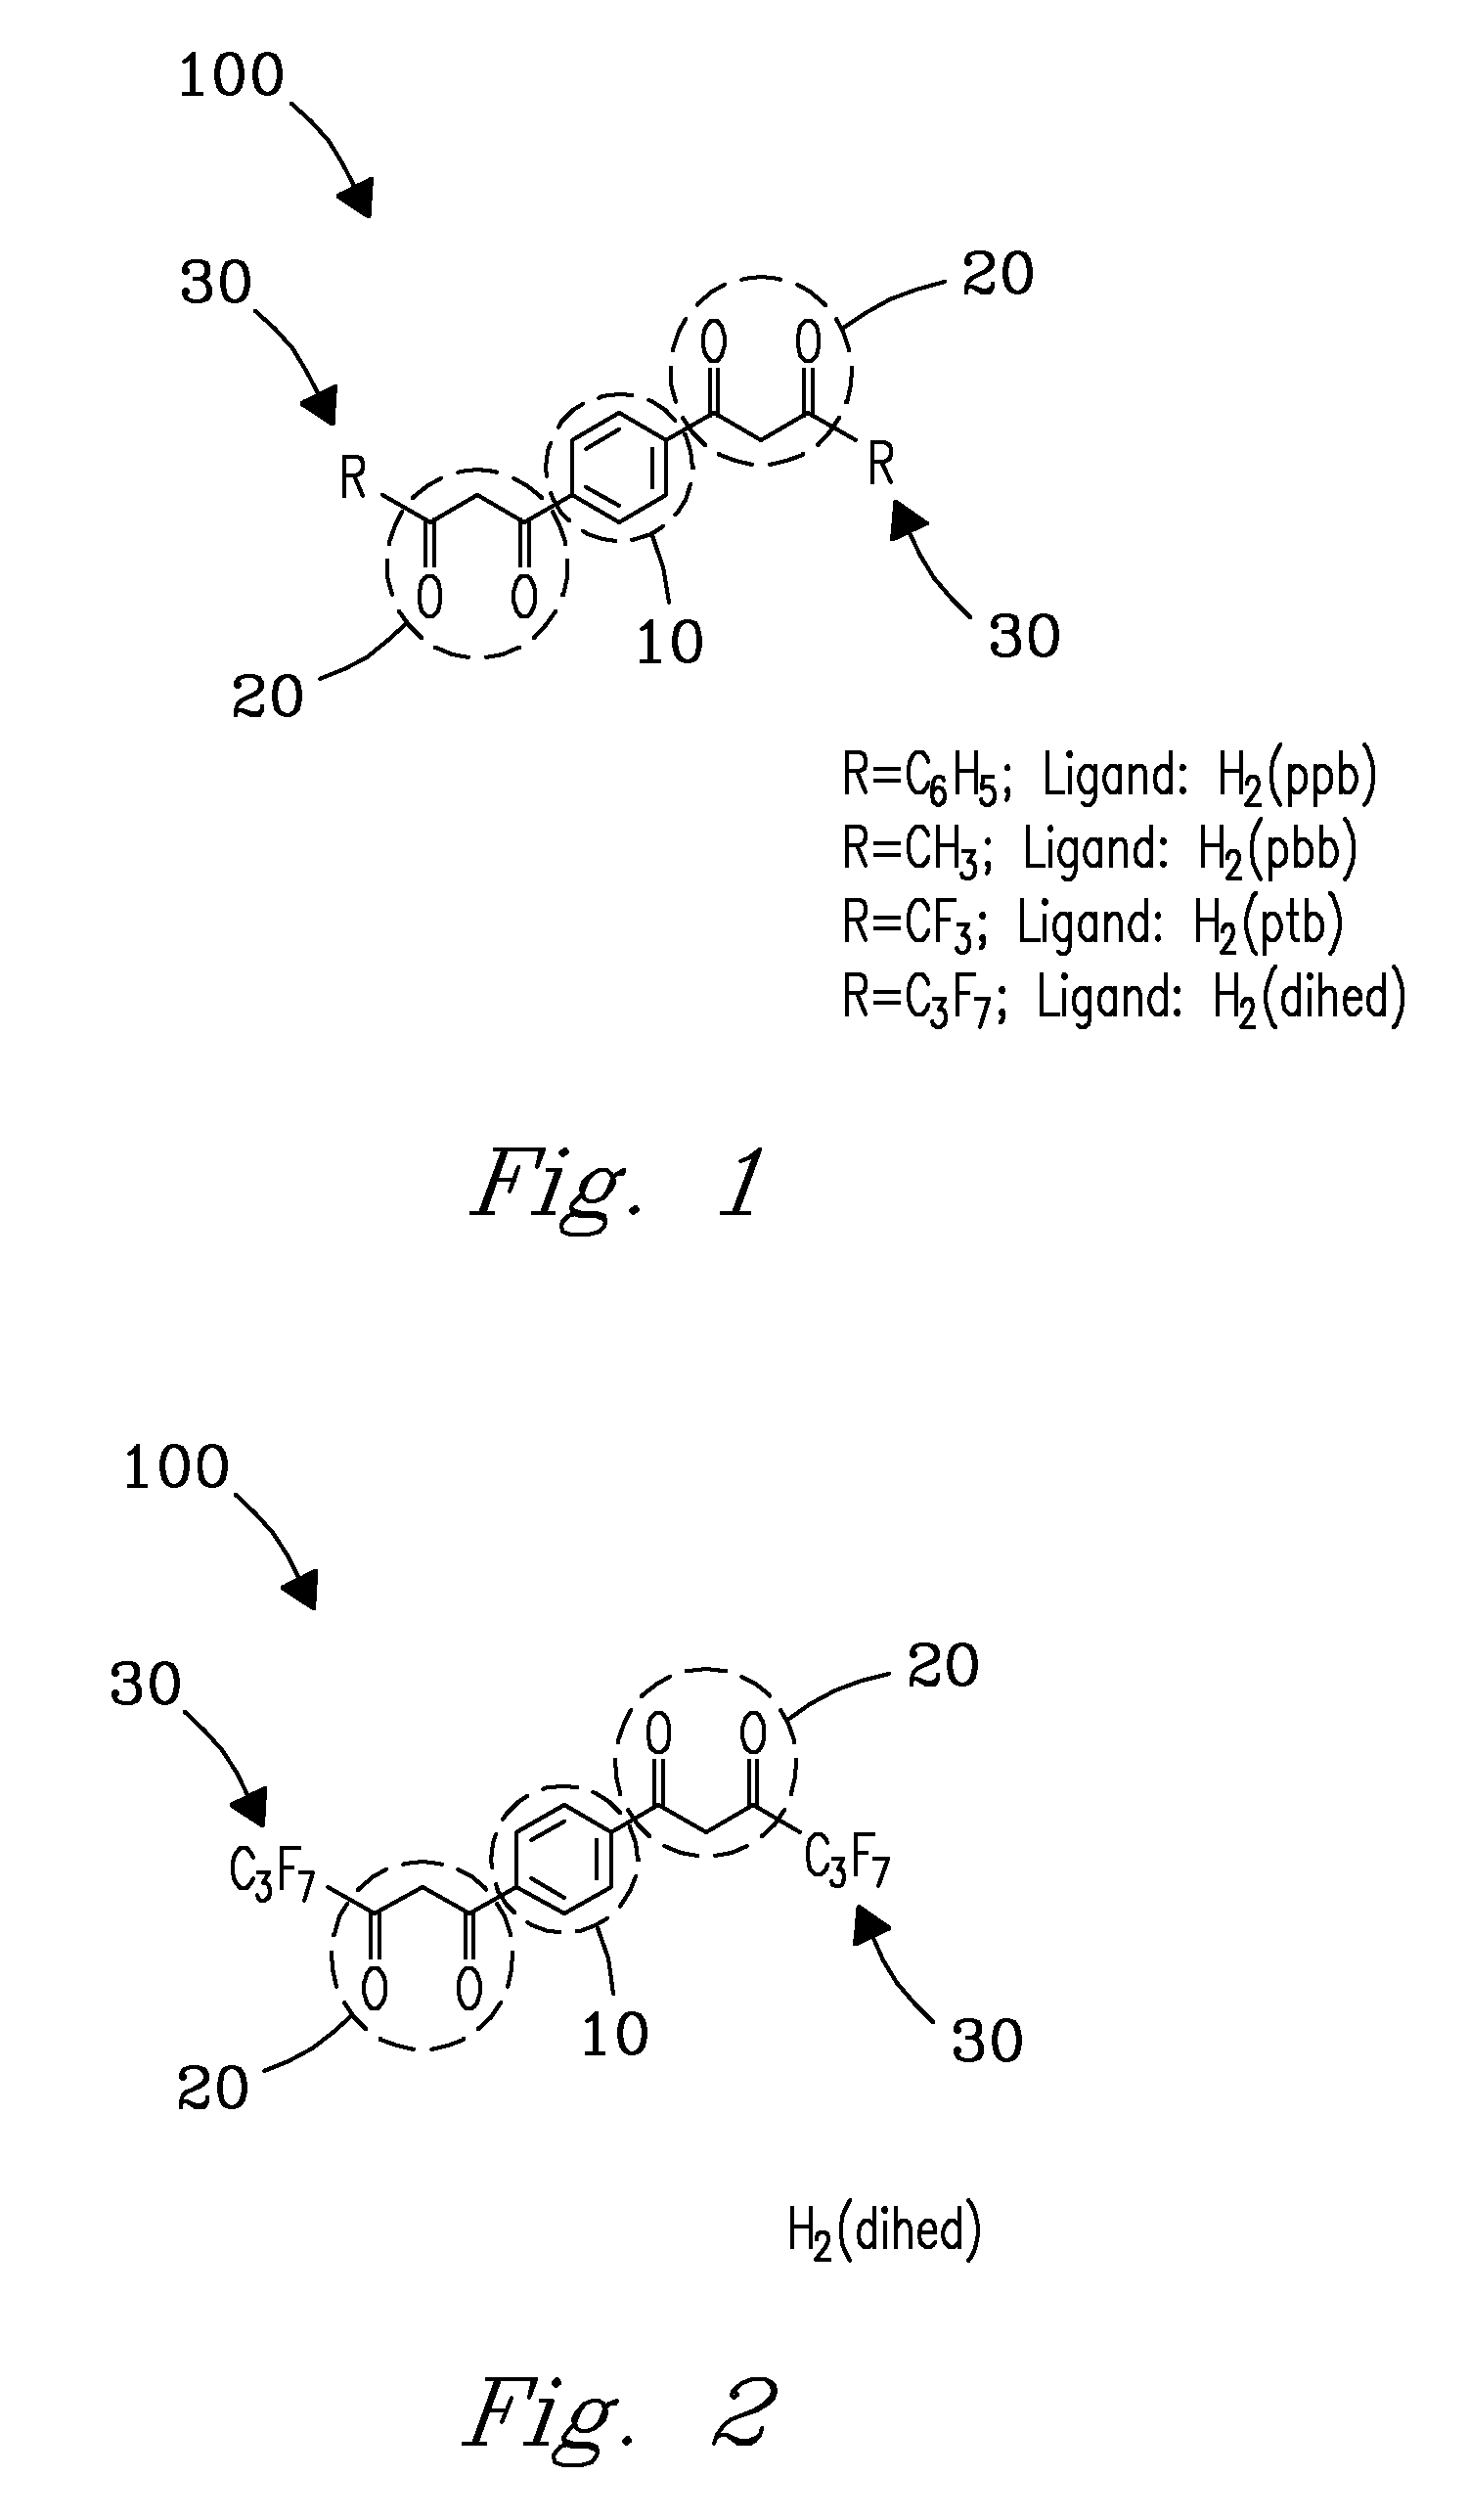 Method and apparatus for selective capture of gas phase analytes using metal beta-diketonate polymers